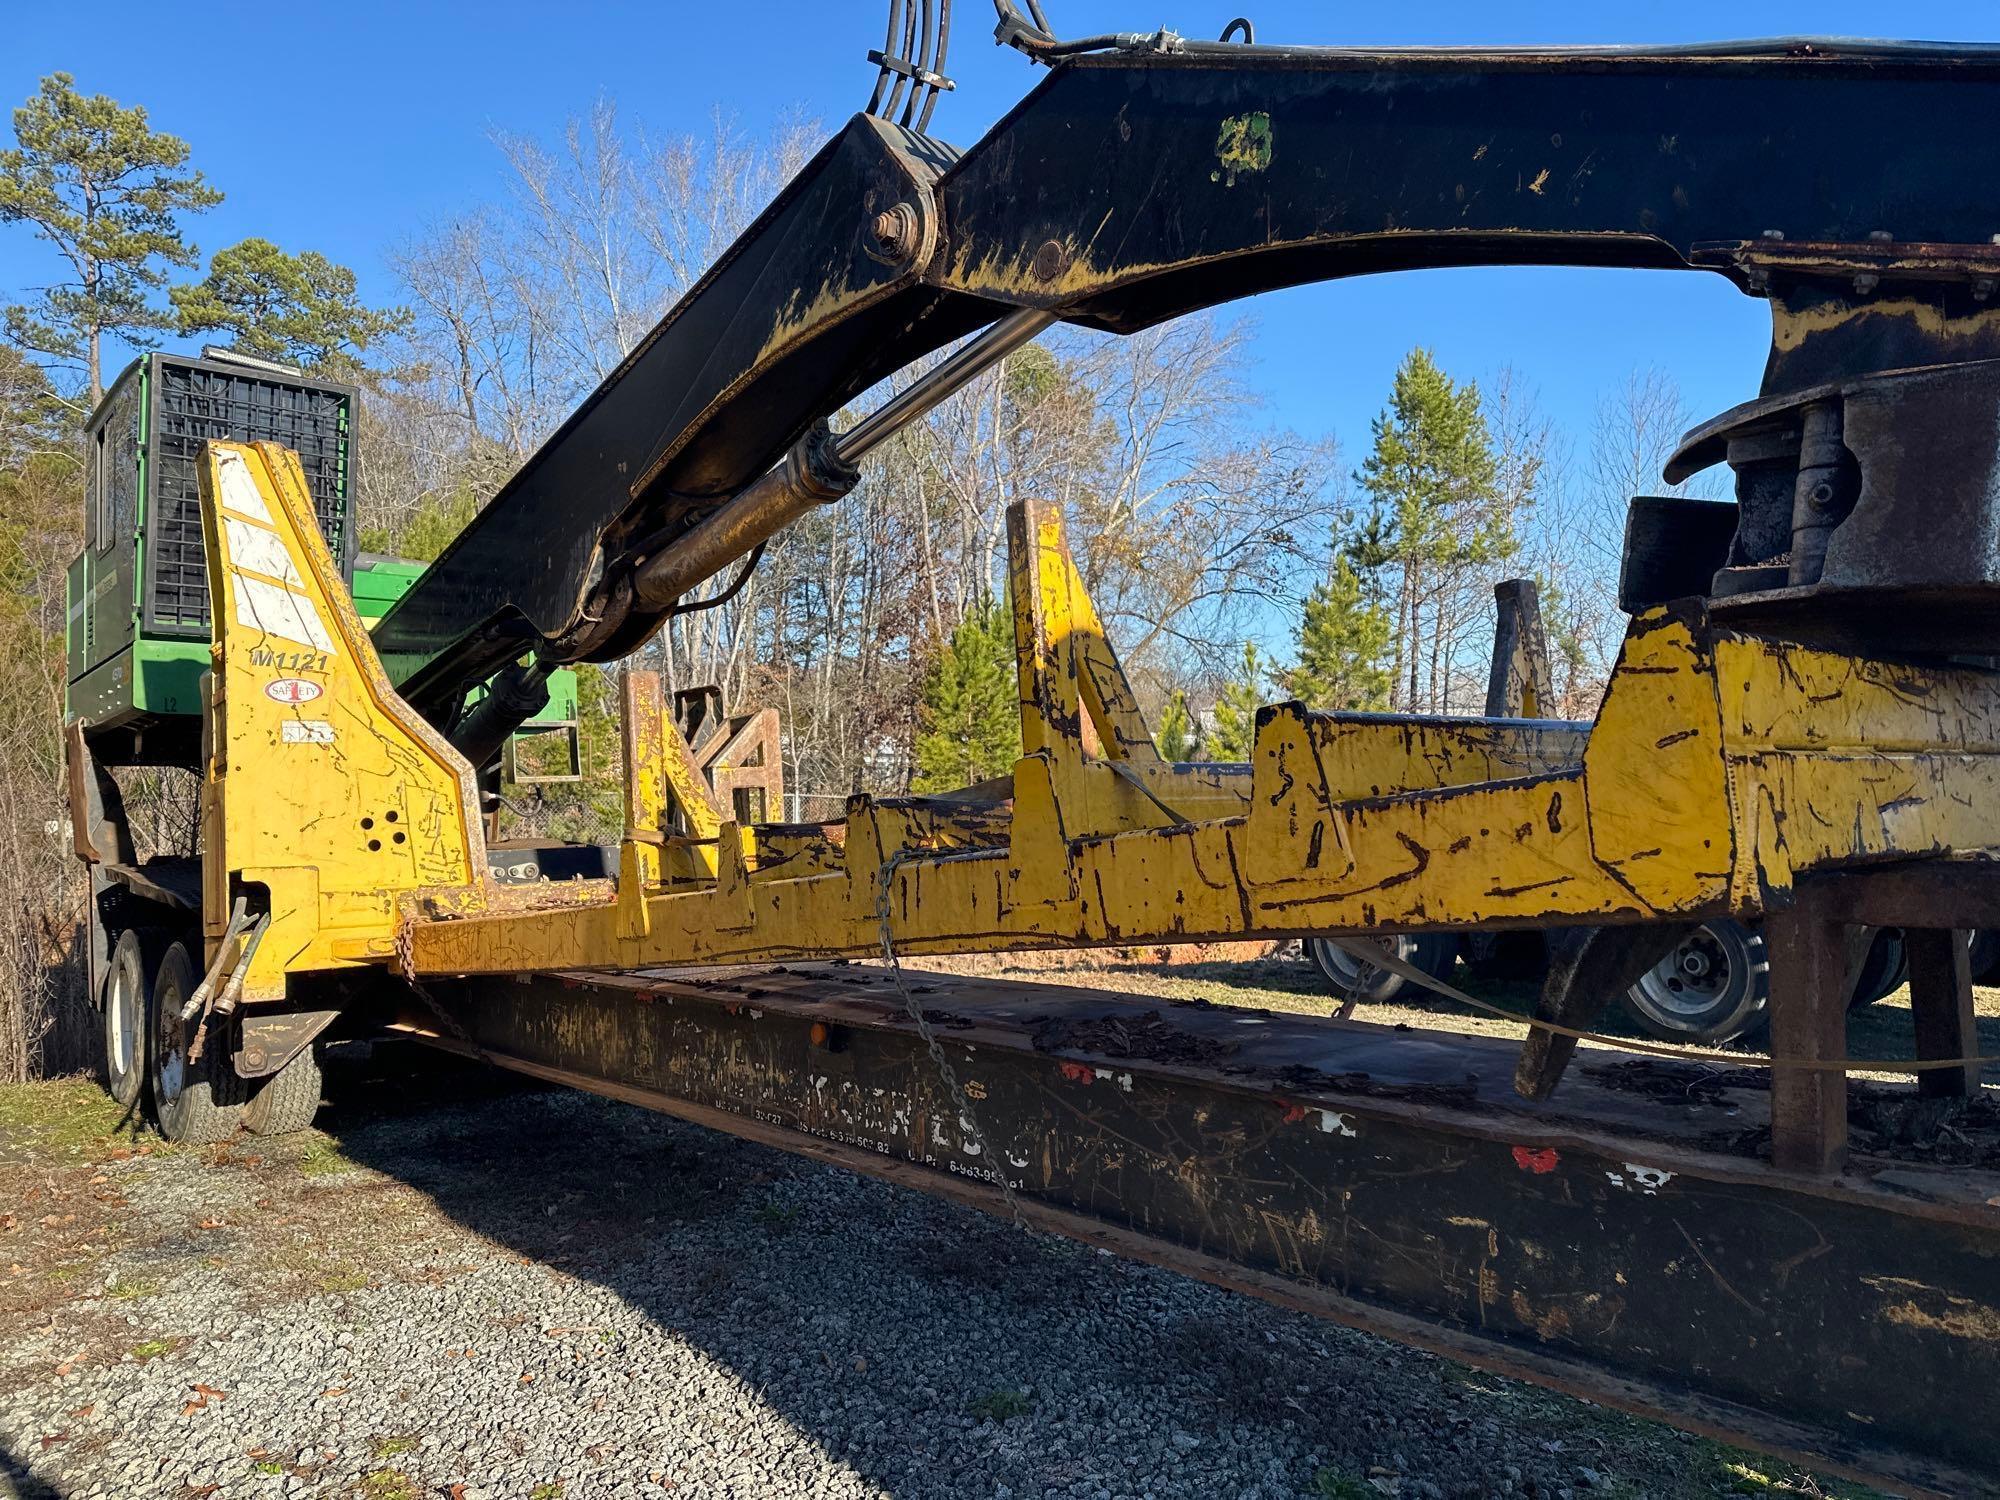 2011 JOHN DEERE 437D TRAILER MOUNTED KNUCKLE BOOM LOG LOADER WITH CSI CUTTING TABLE